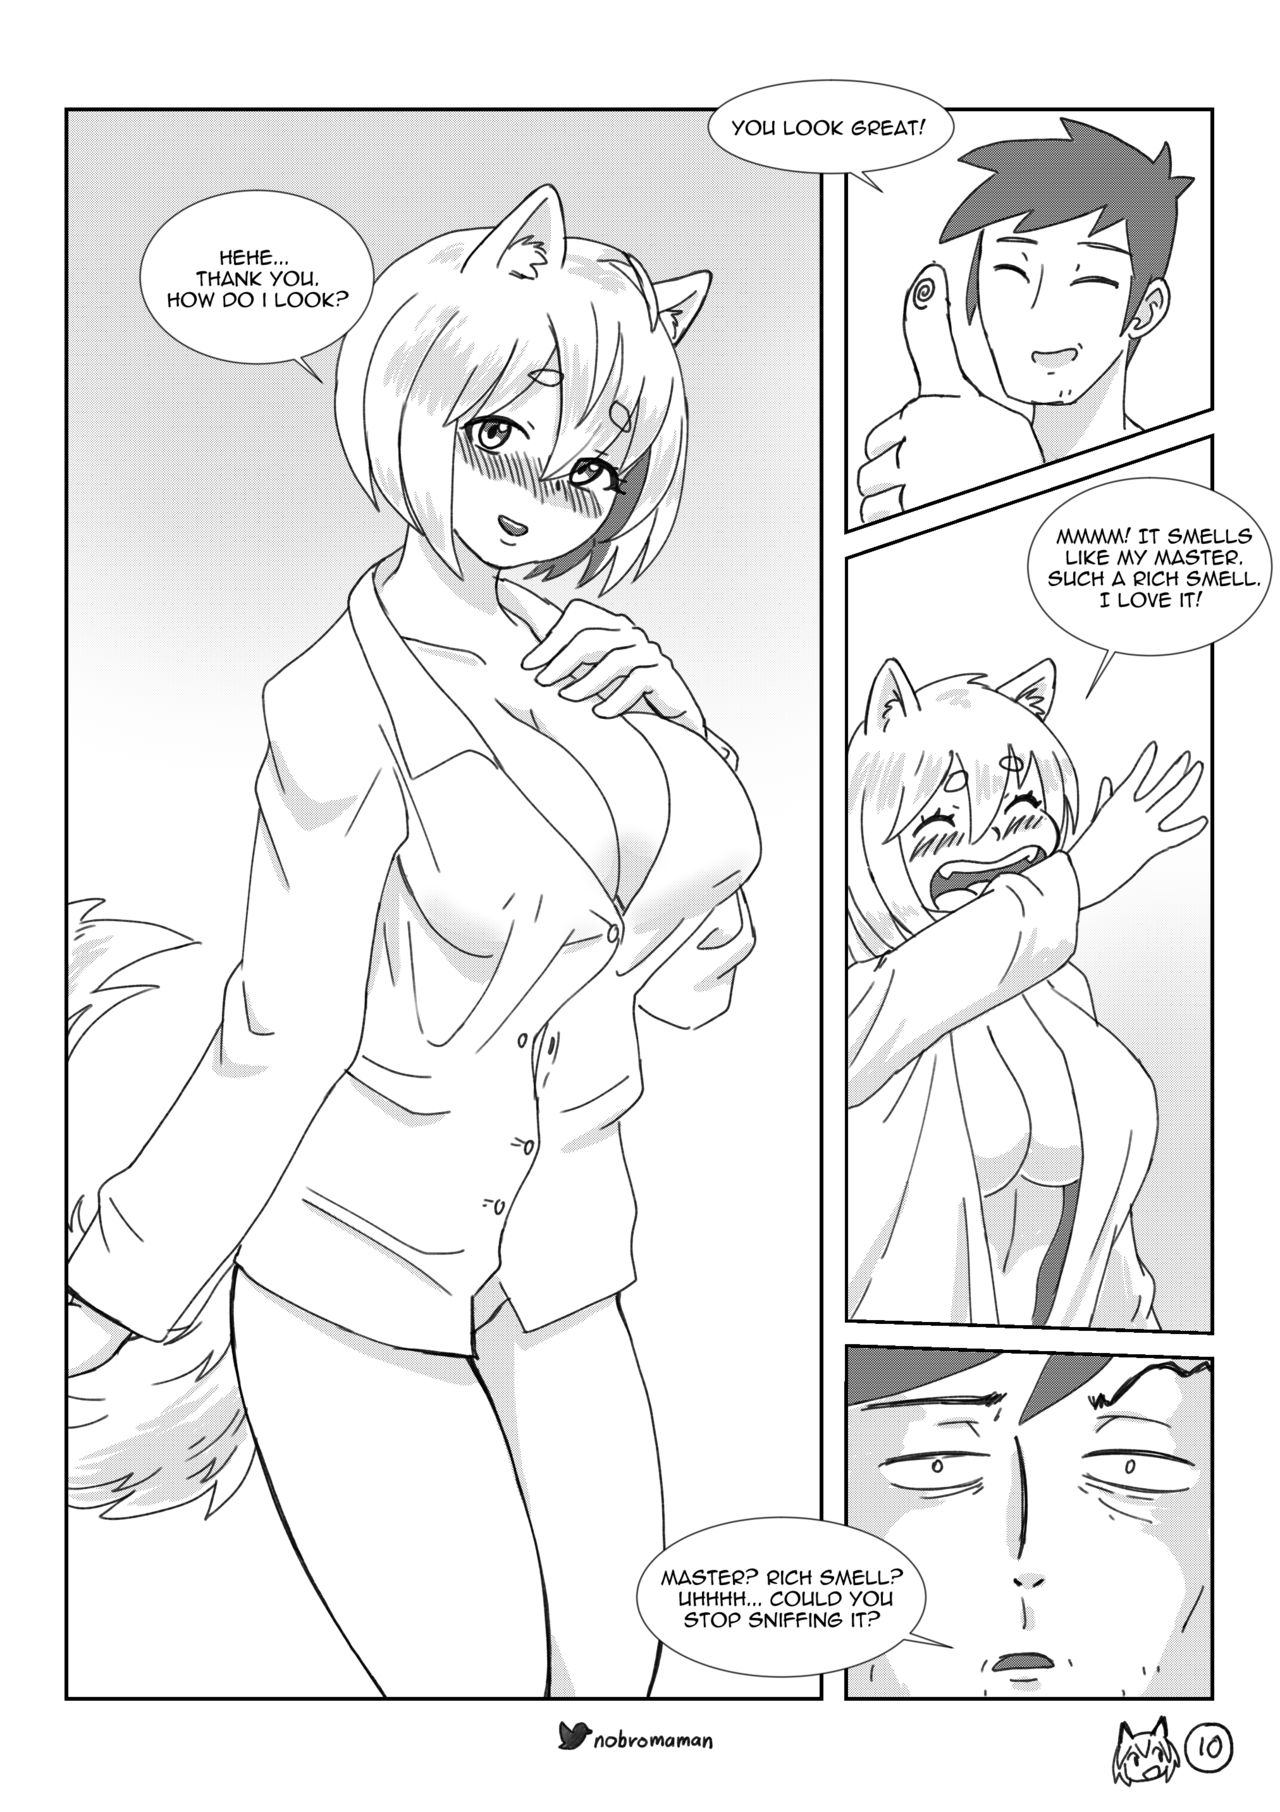 Life with a dog girl - Chapter1 (ongoing) 10